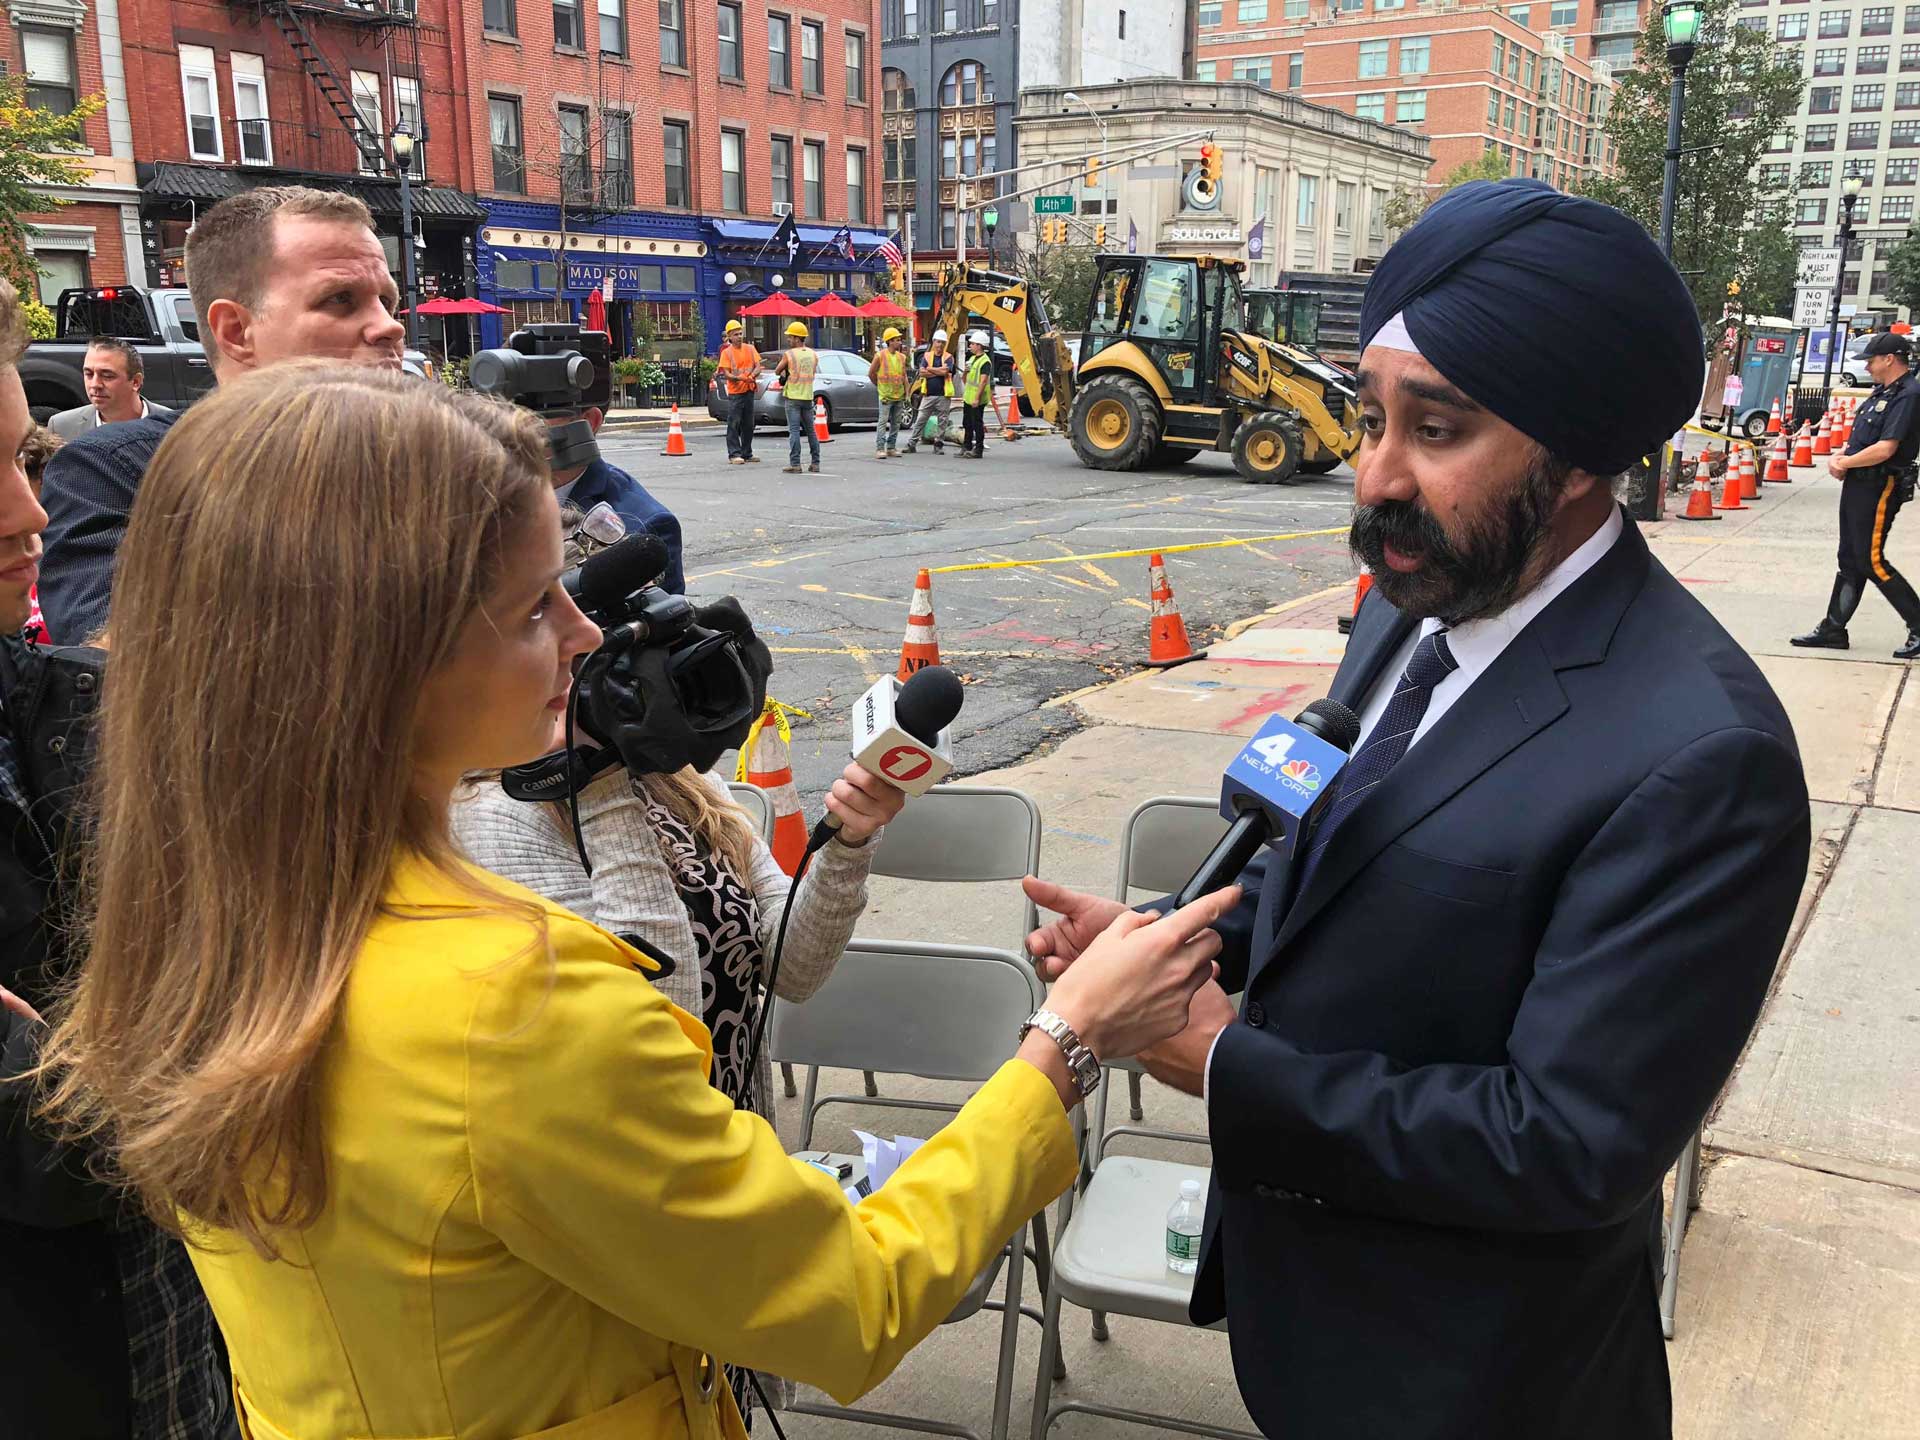 Jen in the field interviewing a man in a suit and tie, wearing a turban